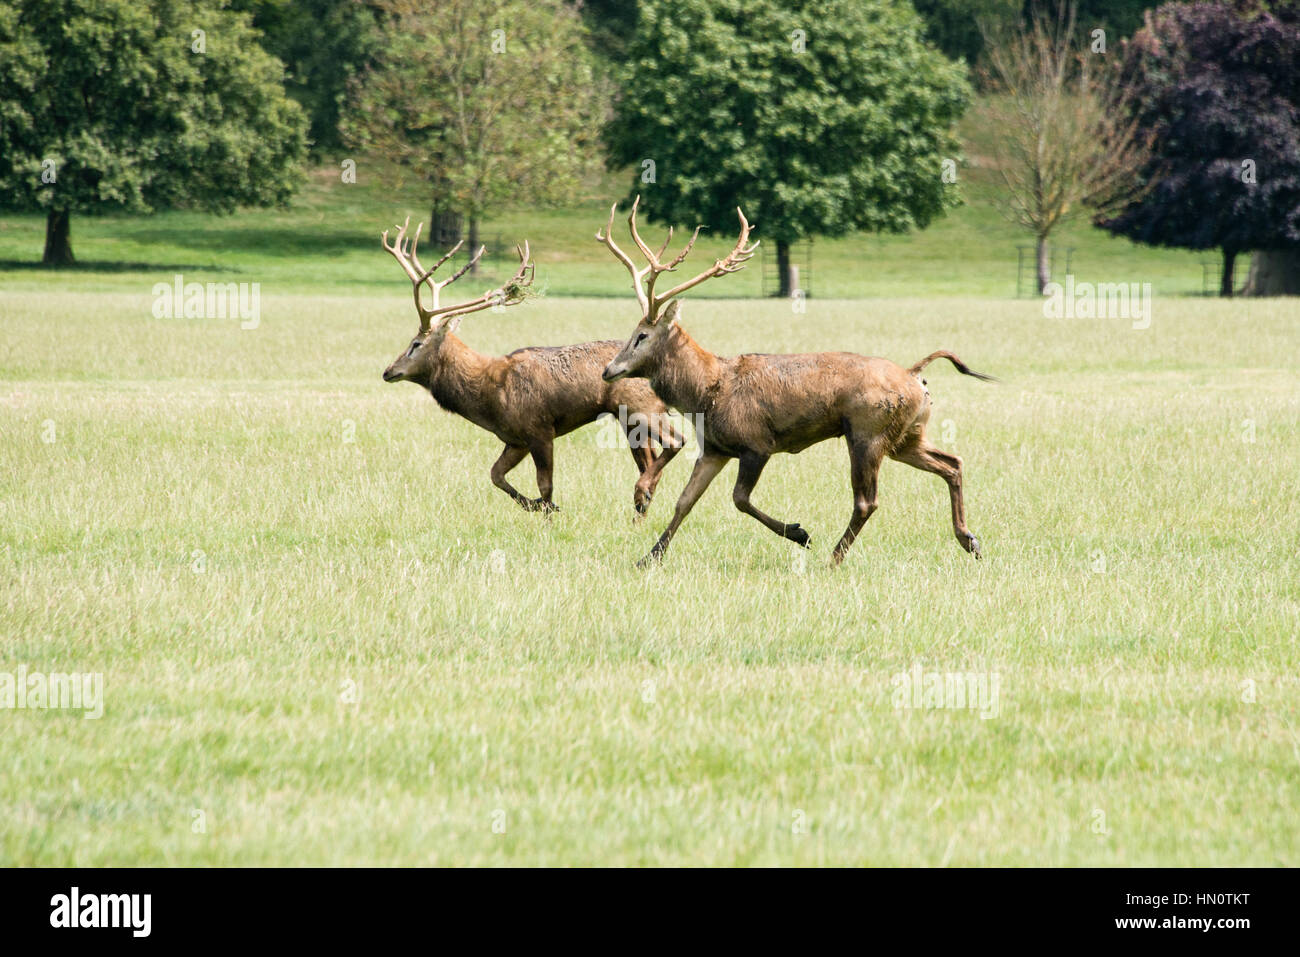 Two red deer stags running through a field at Woburn abbey, UK Stock Photo